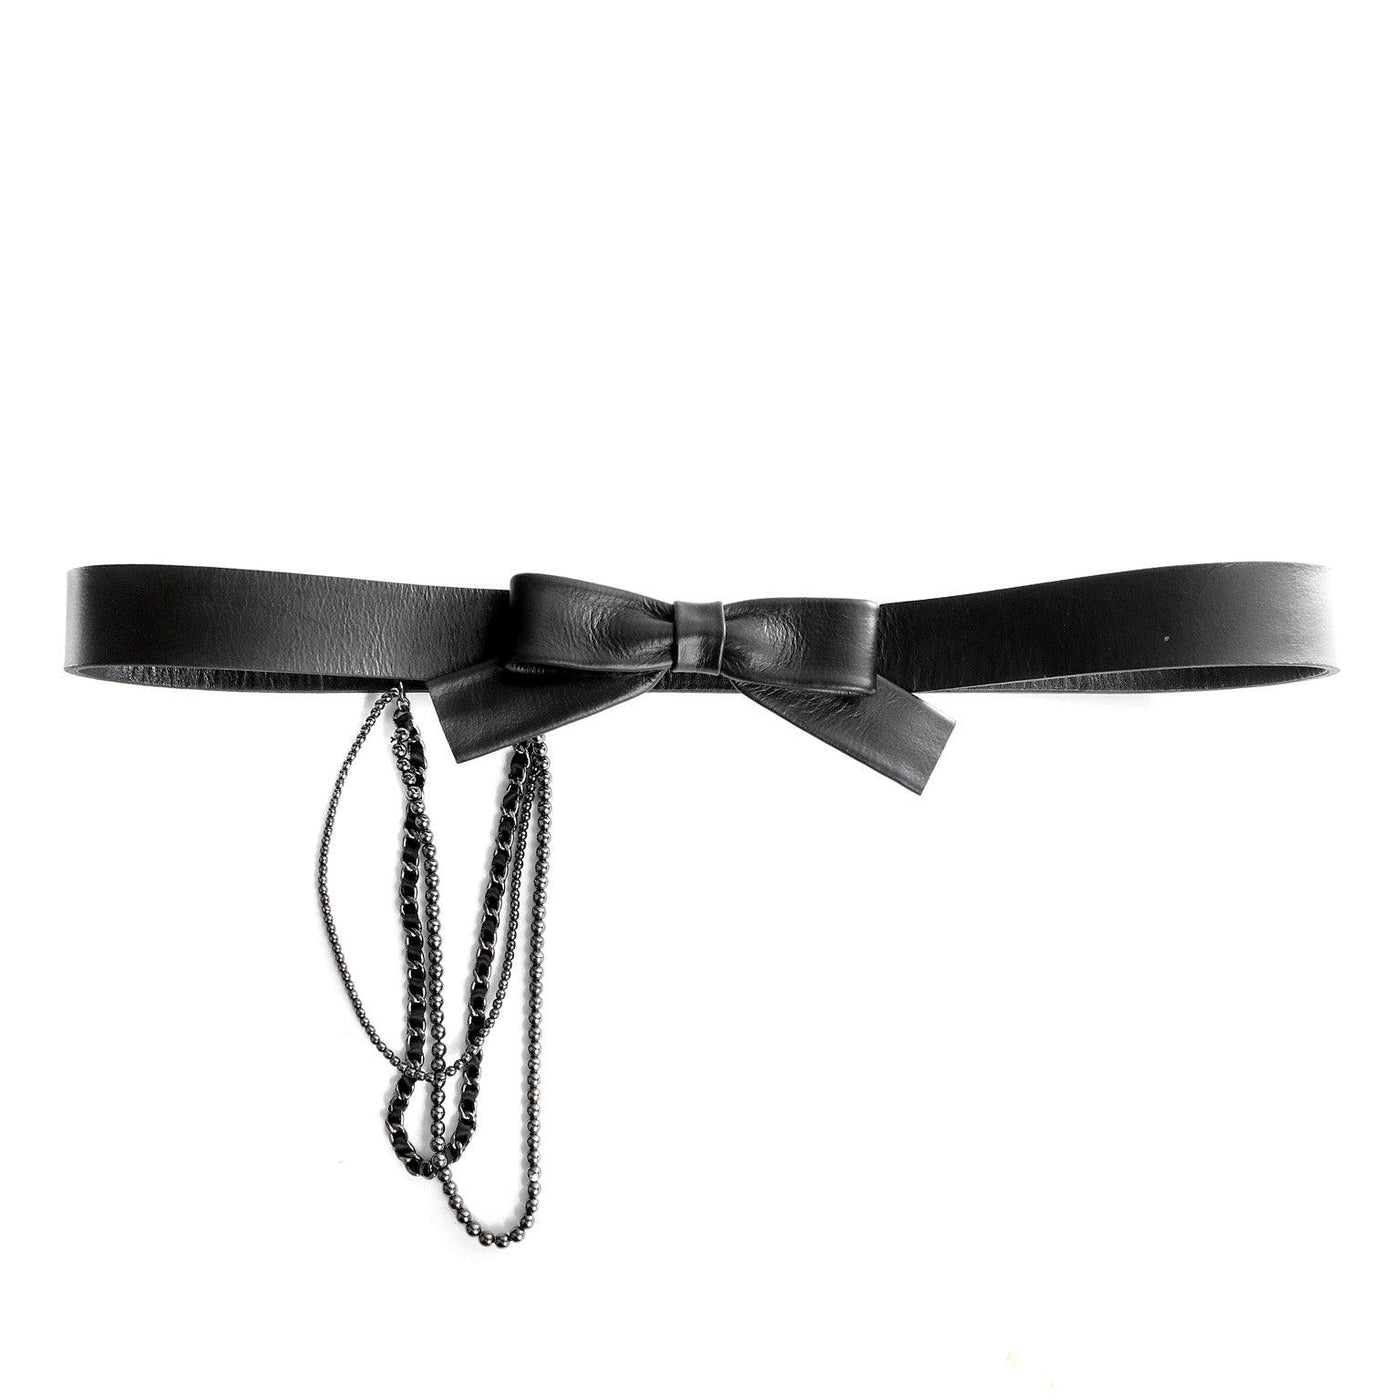 Chanel Black Leather Bow Belt with Chains size 95 - Only Authentics